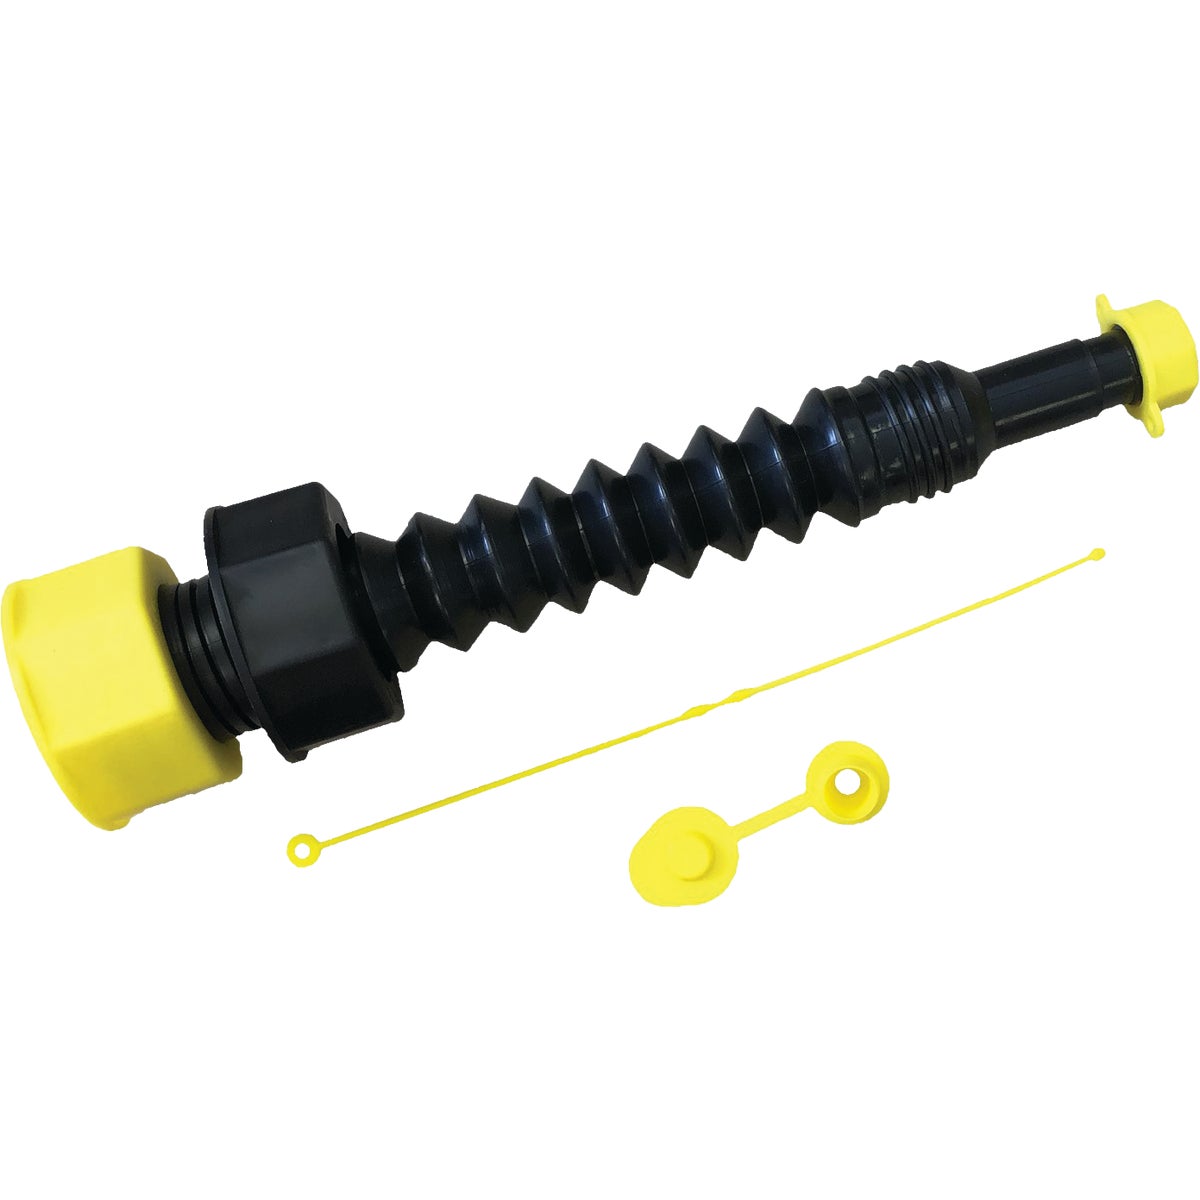 Item 570062, EZ-Pour replacement spout for water jugs is a great way to update your 